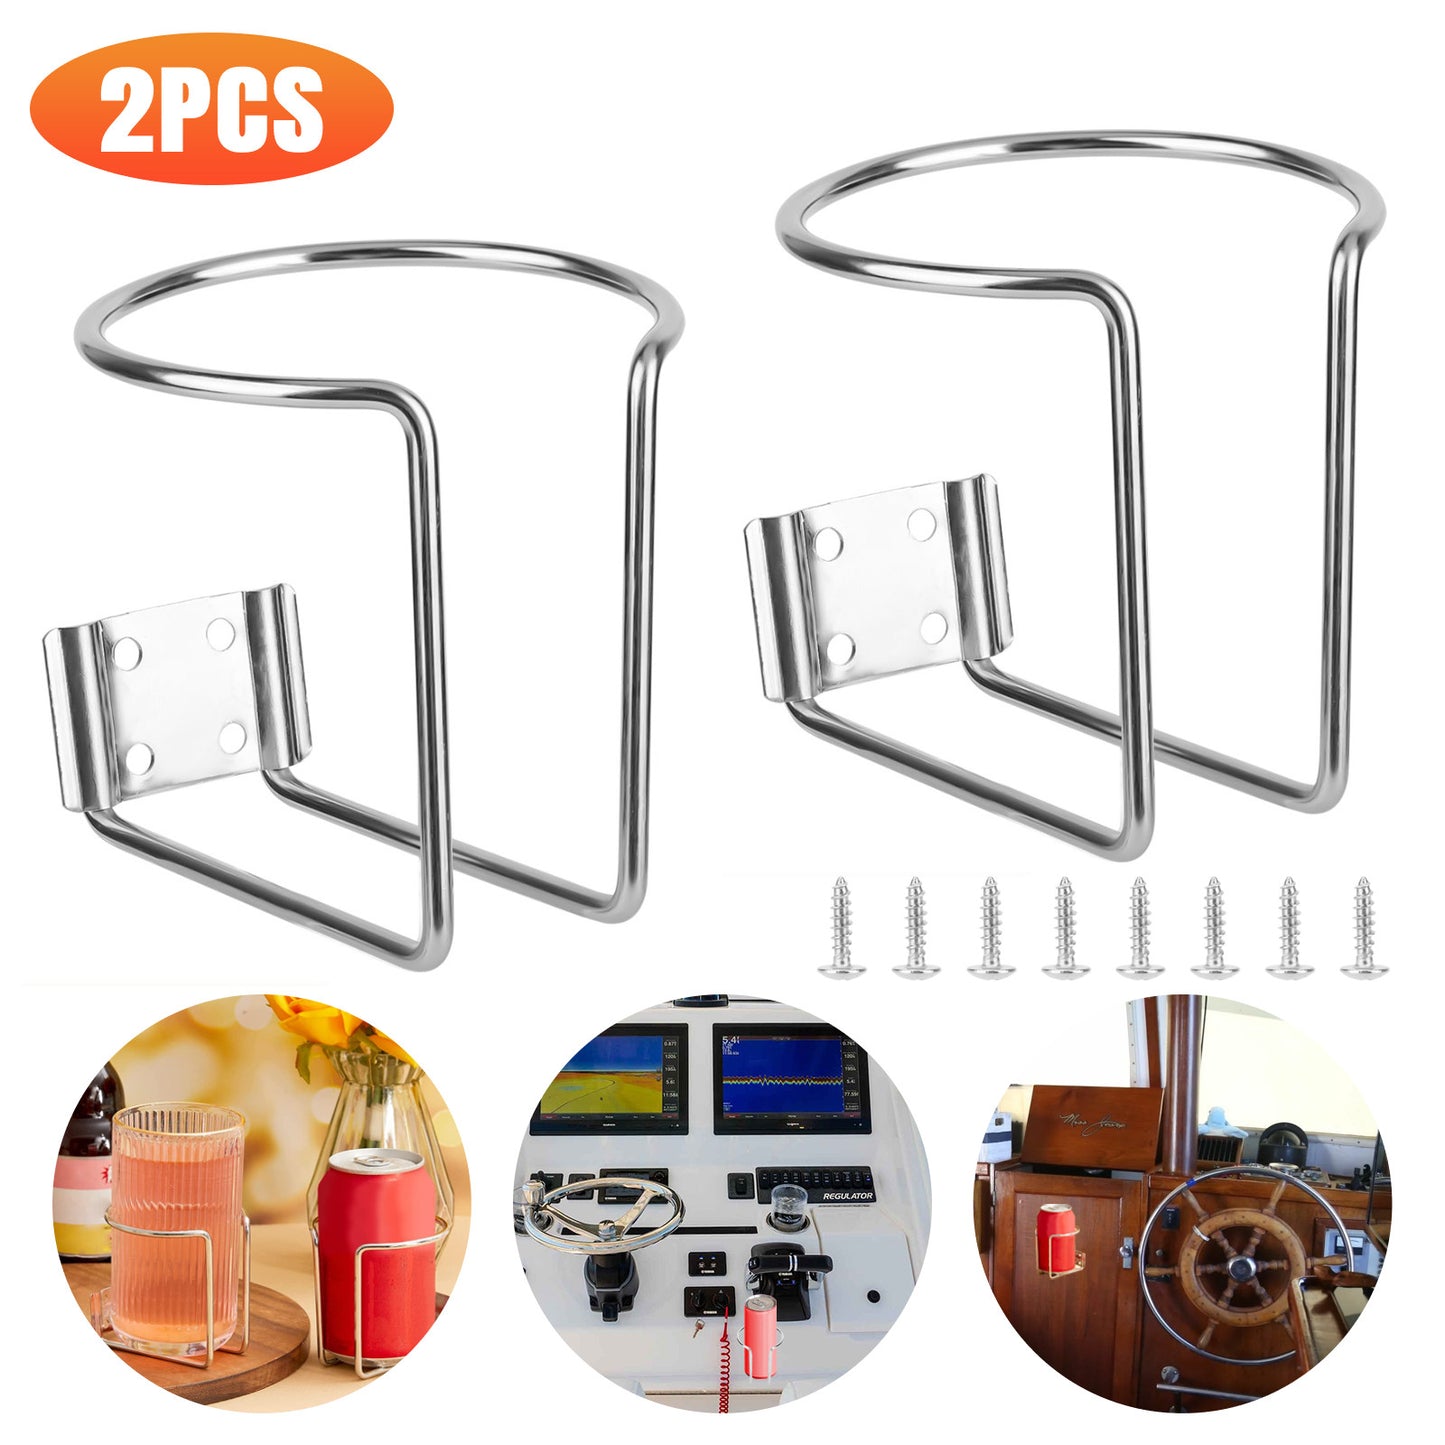 2 Pcs Stainless Steel Cup Holder Adjustable for Boat Truck RV